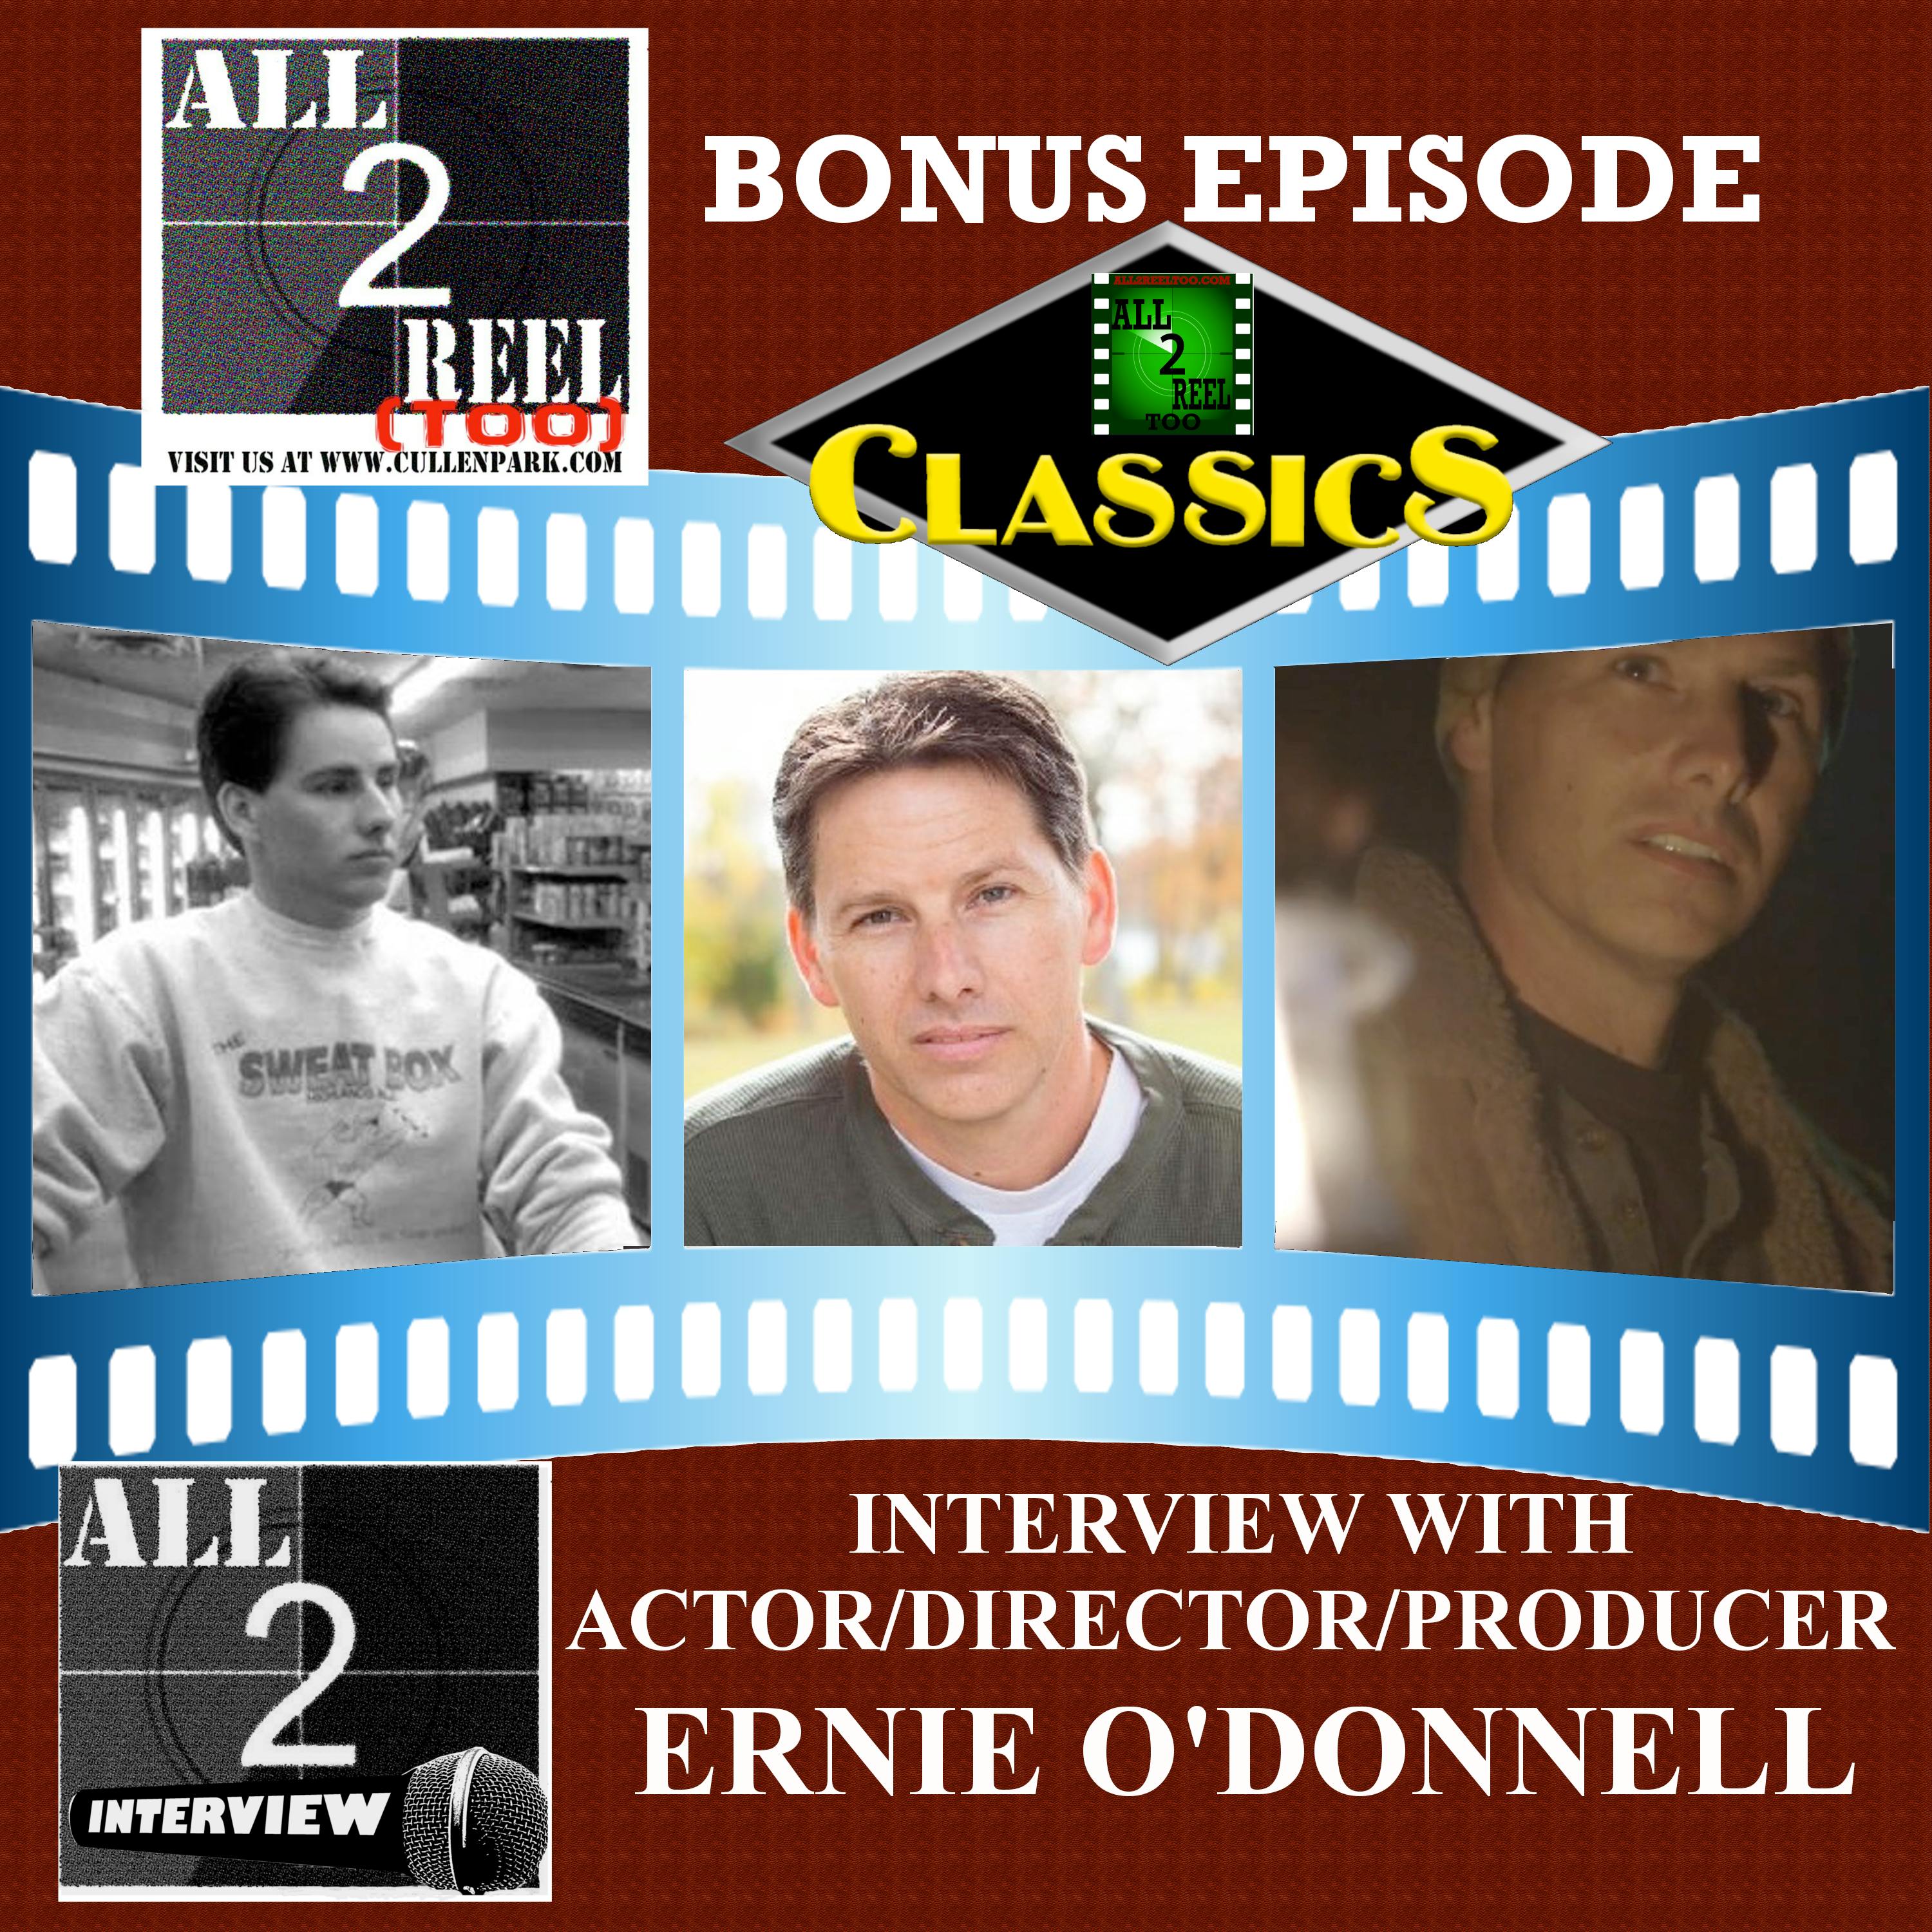 ALL2REELTOO CLASSICS - ERNIE O'DONNELL INTERVIEW